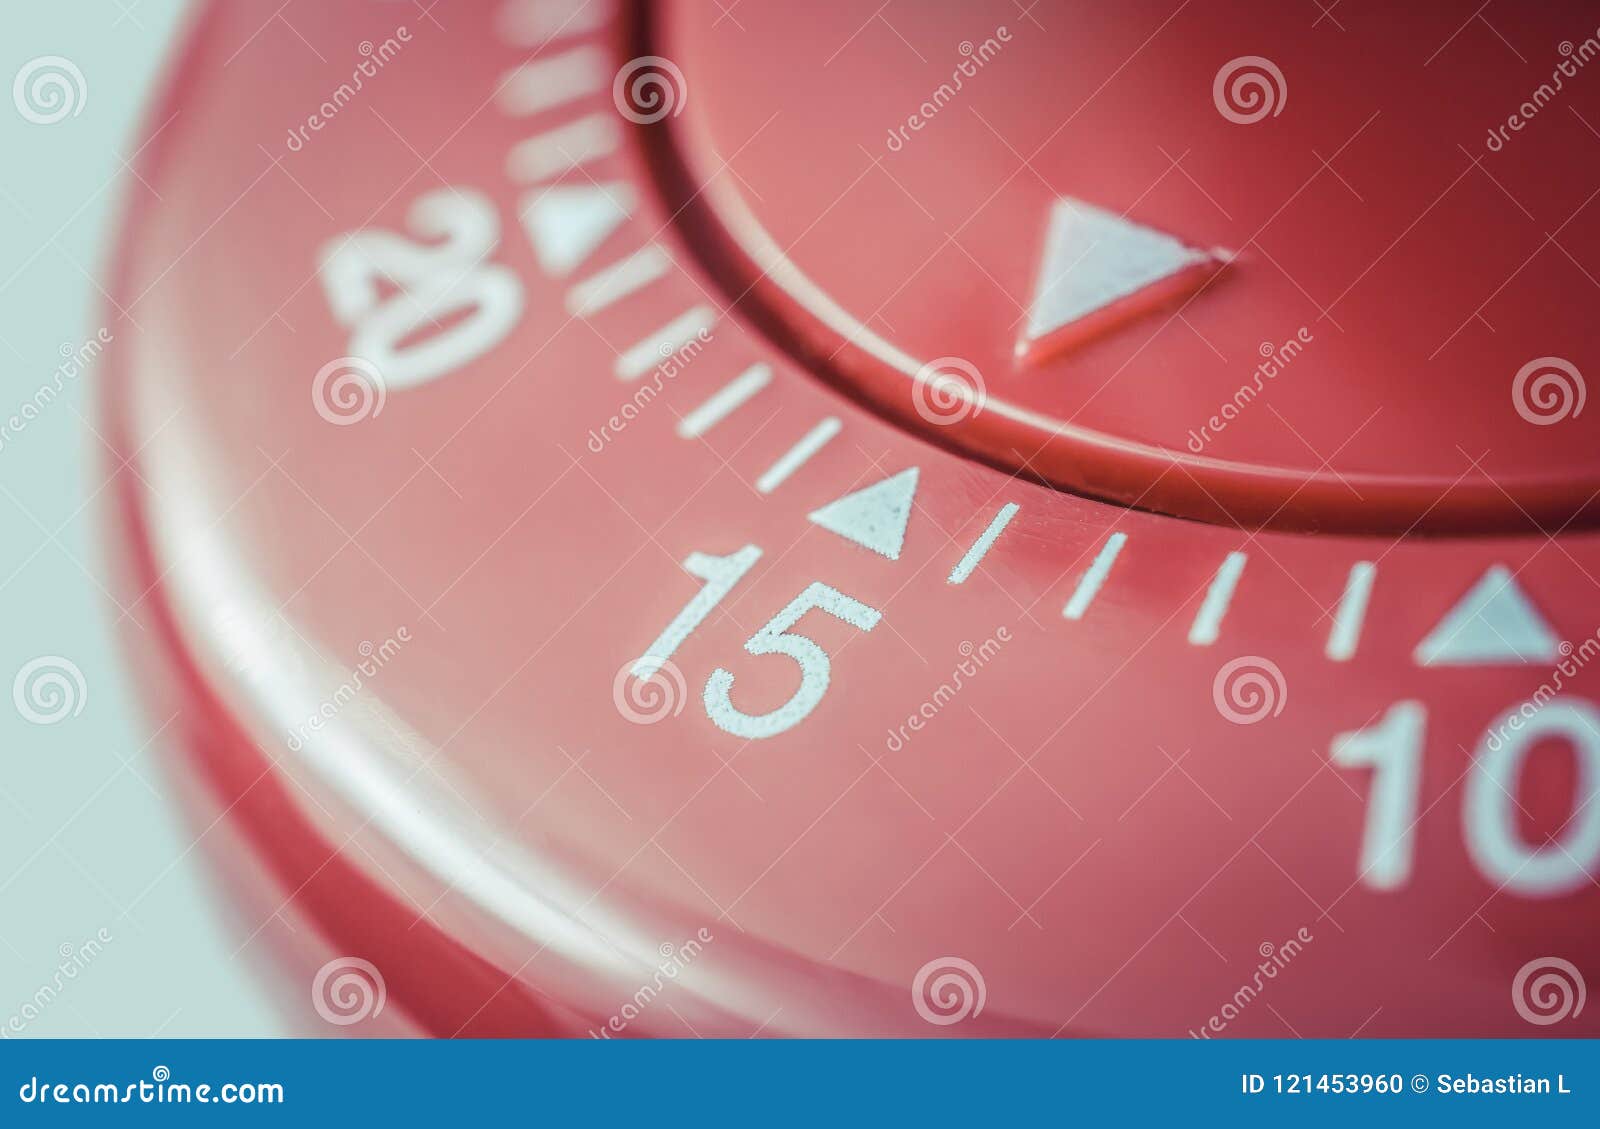 15 Minutes - Macro of a Flat Red Kitchen Egg Timer Stock Photo Image of flat, fifteen: 121453960